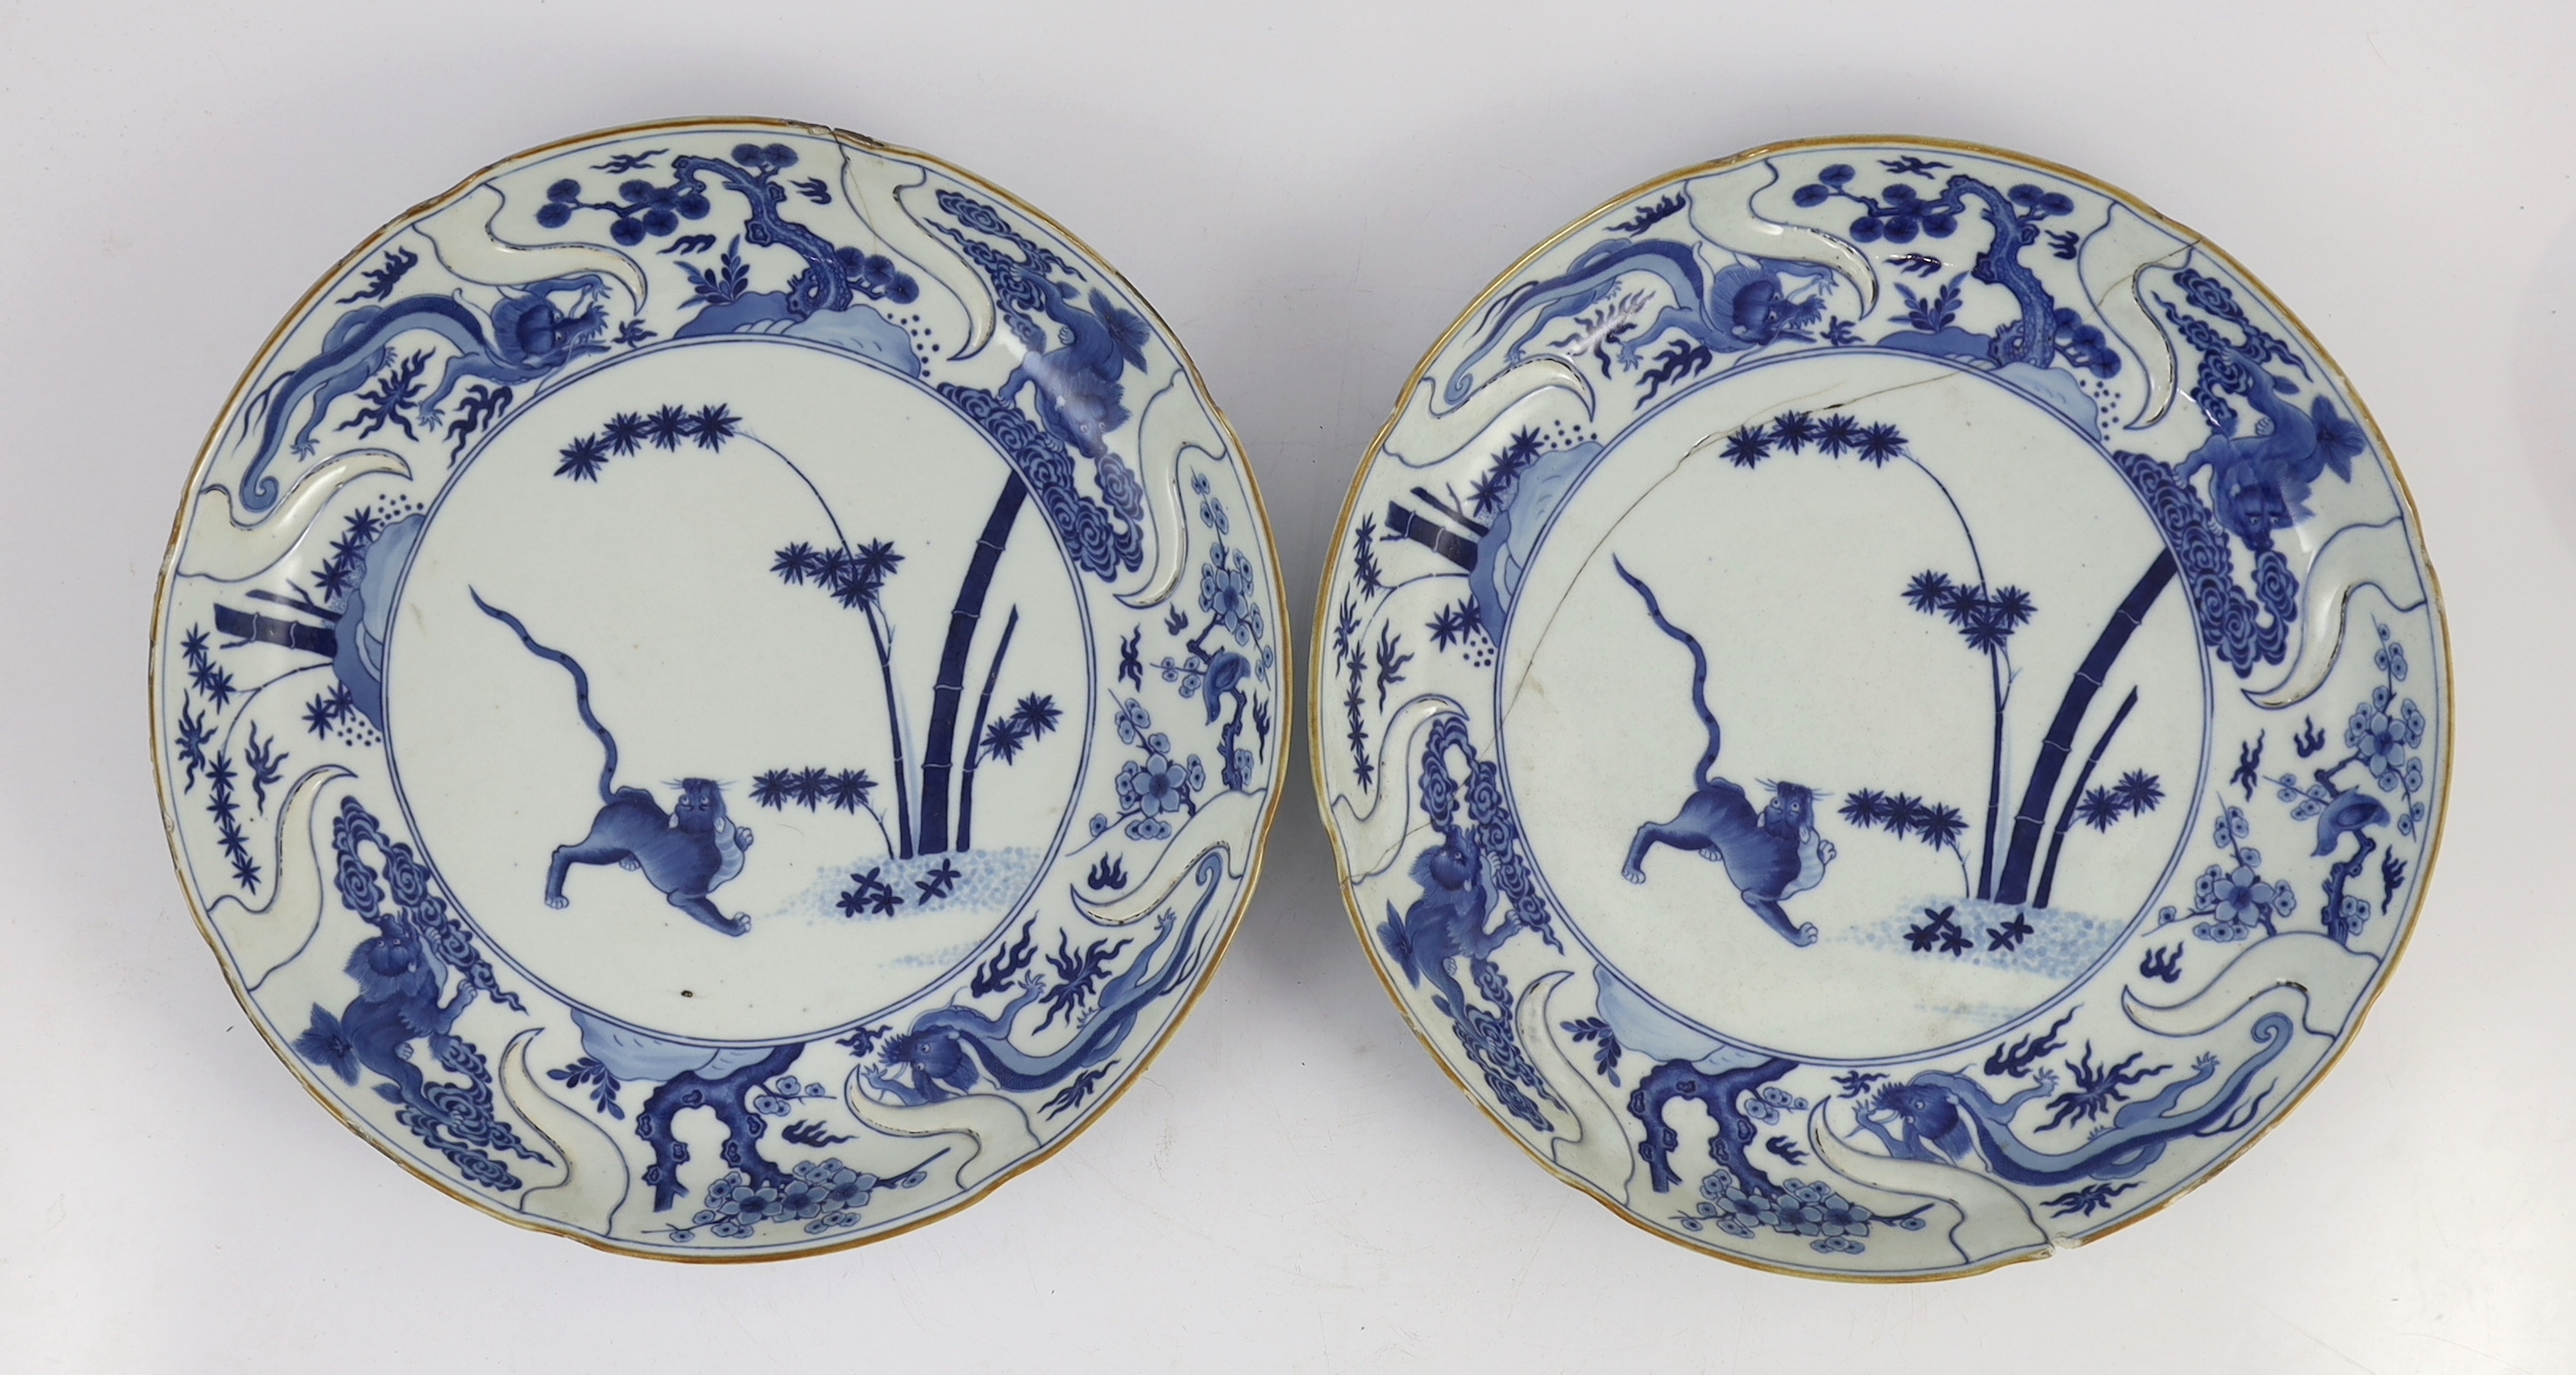 A pair of Chinese blue and white armorial dishes in Japanese Kakiemon style, Qianlong period, c. - Image 2 of 5